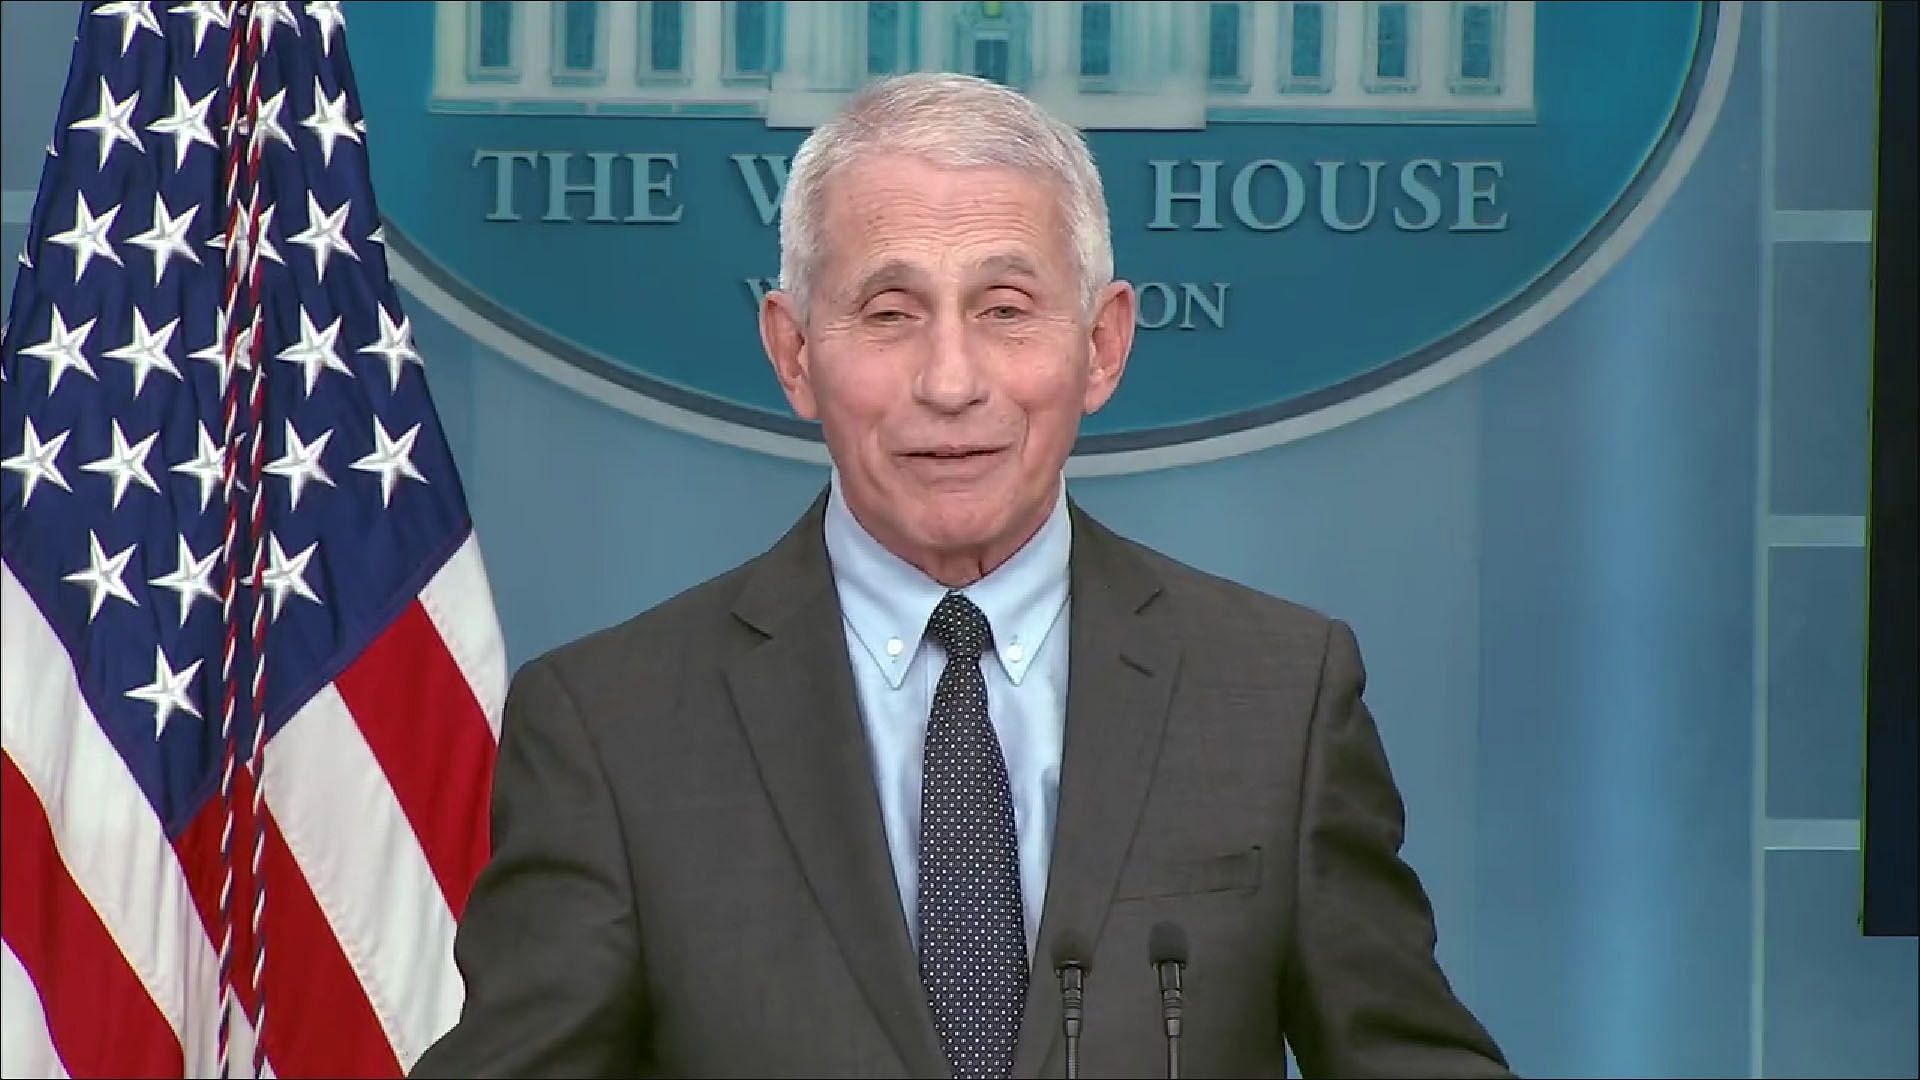 Fauci at his final press event at the White House (image via Twitter/ @PressSec)